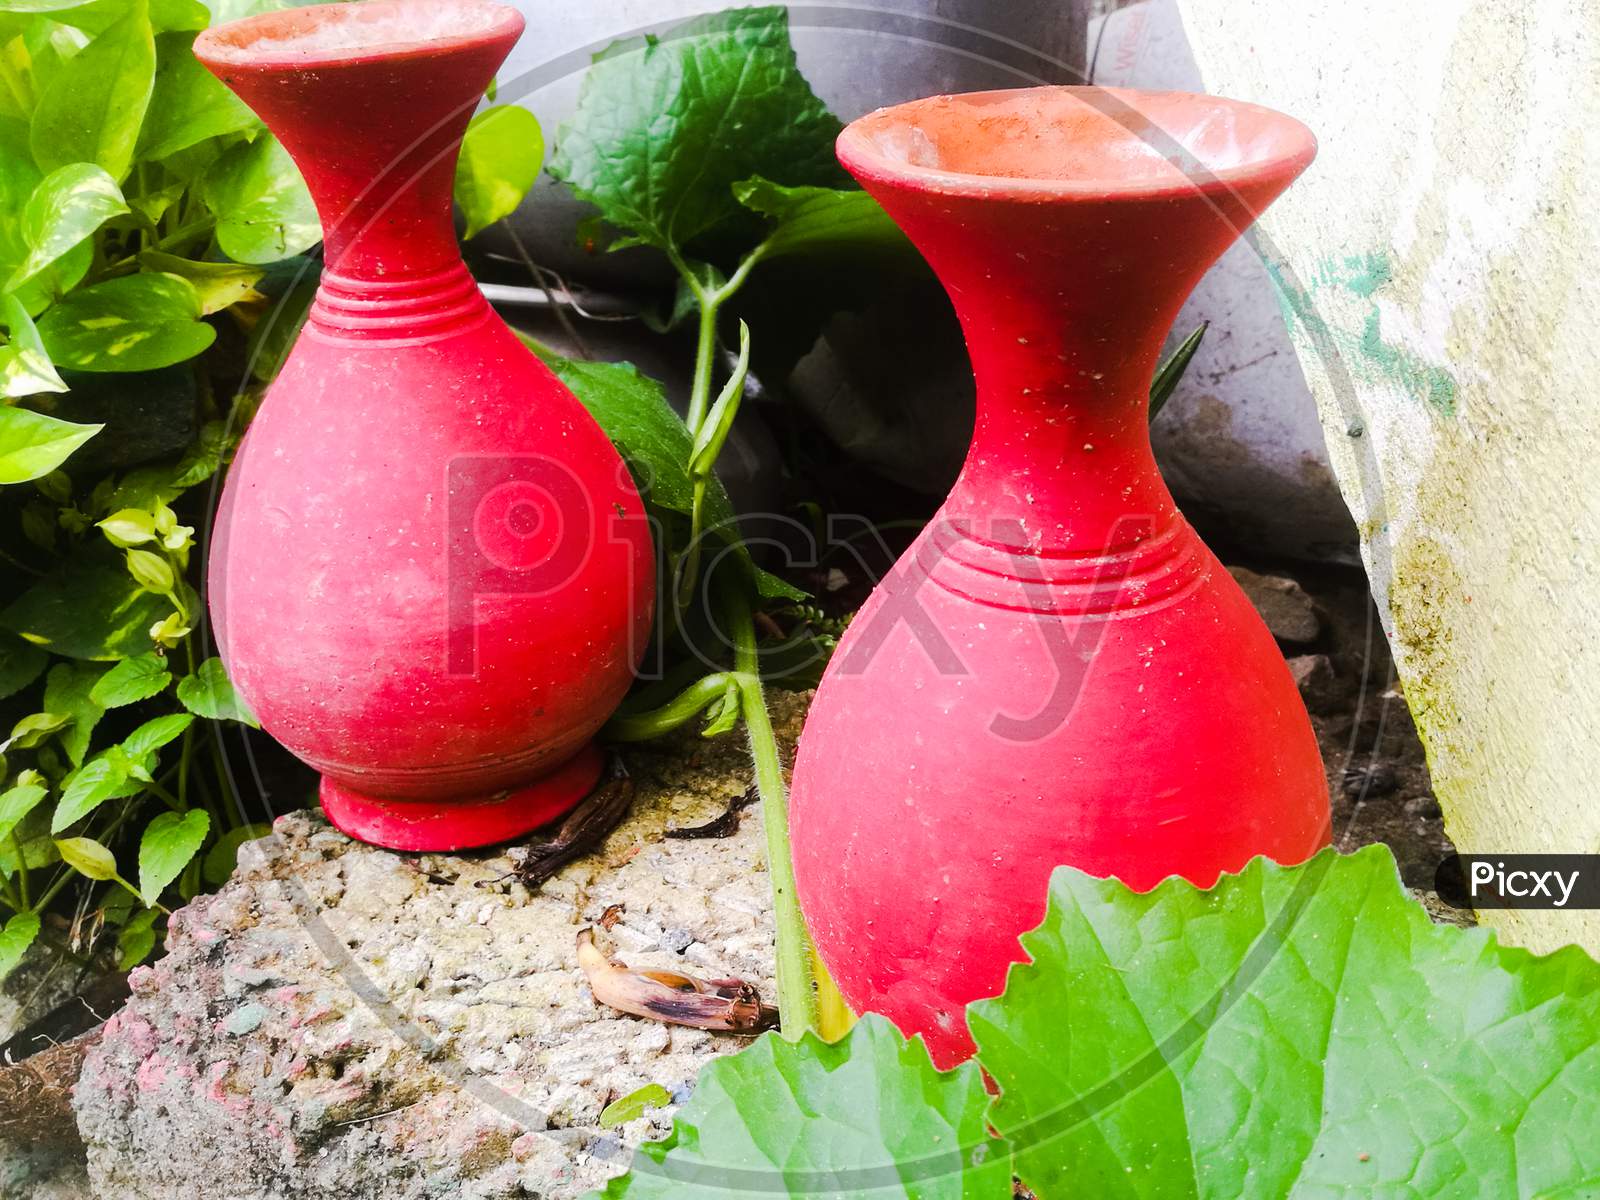 Earthen Pots Placed Side By Side For Flowers Placed In A Garden.